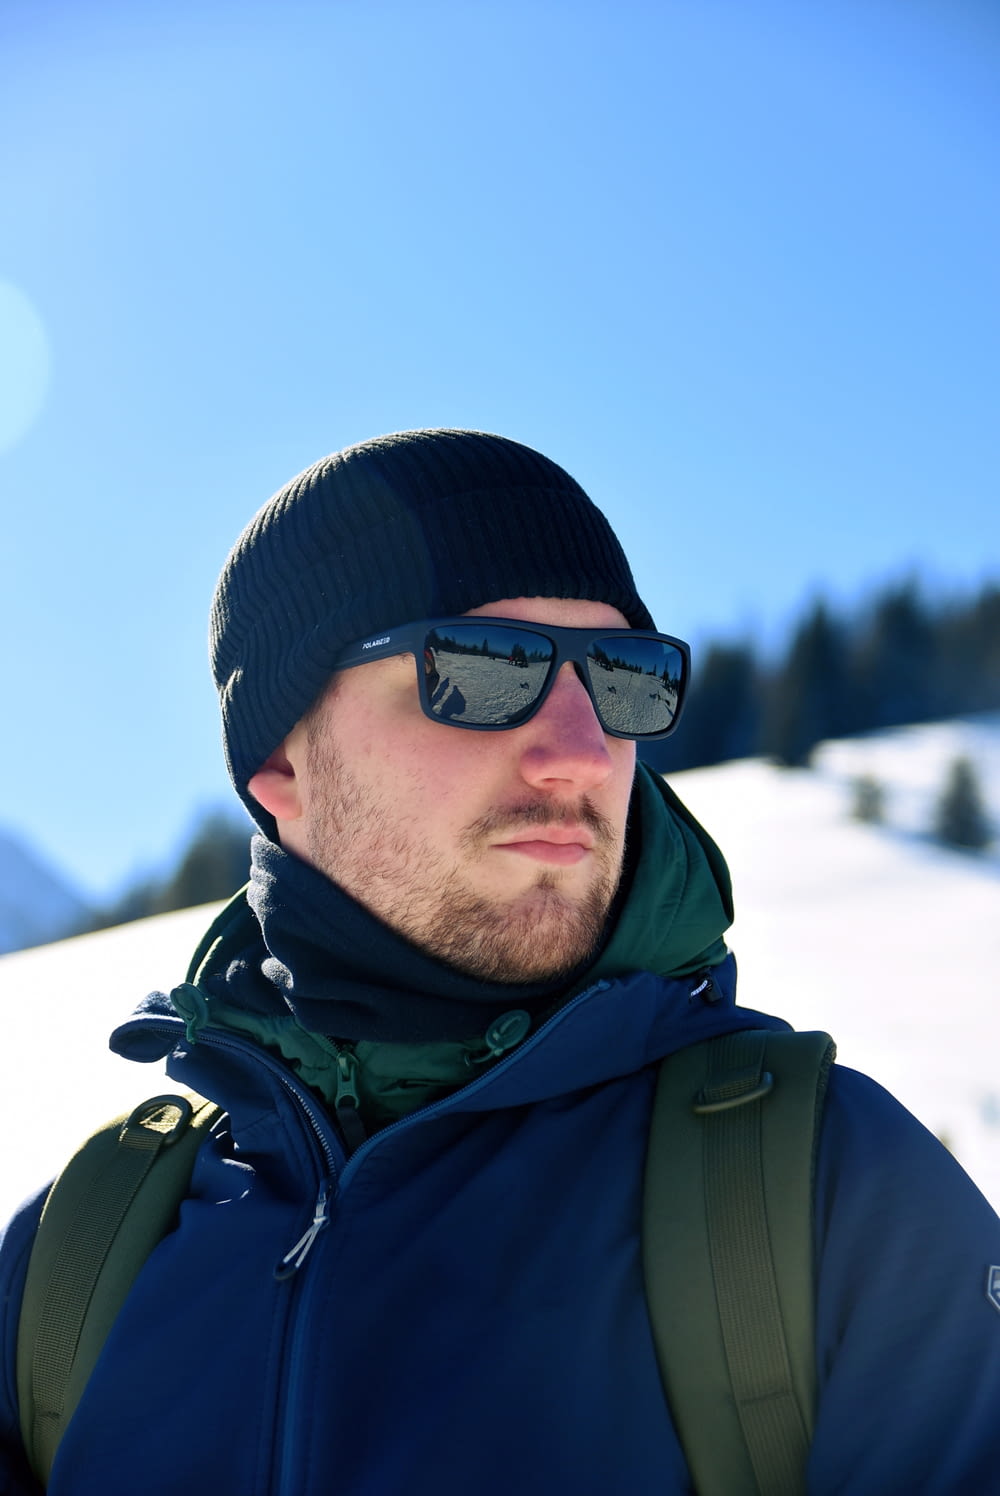 a man with a backpack and sunglasses on in the snow